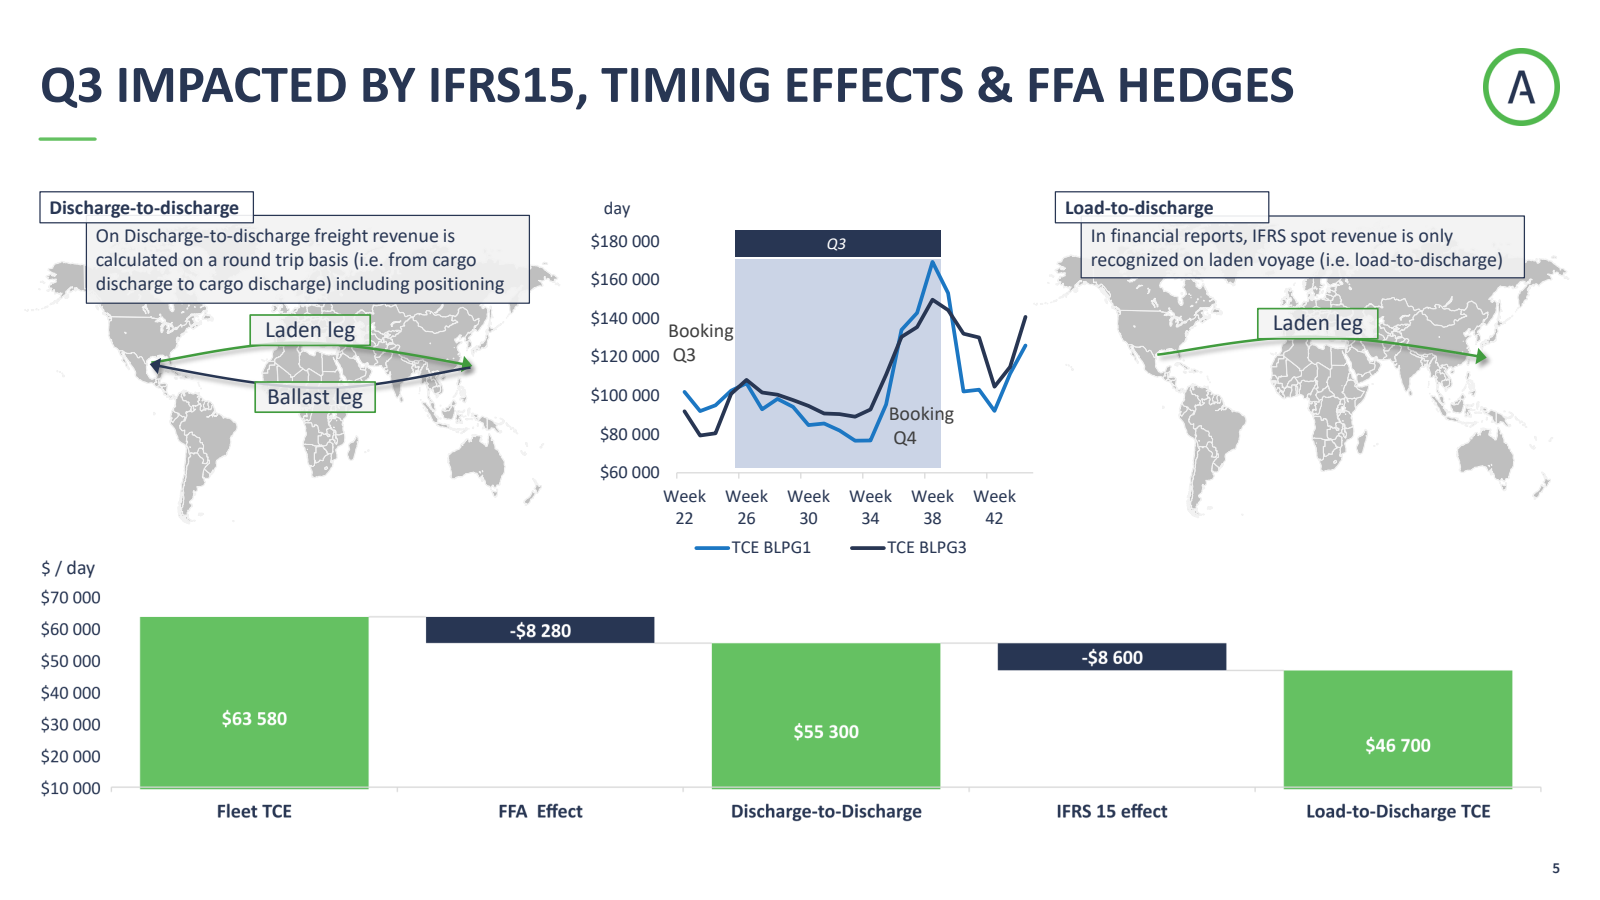 Q3 IMPACTED BY IFRS1